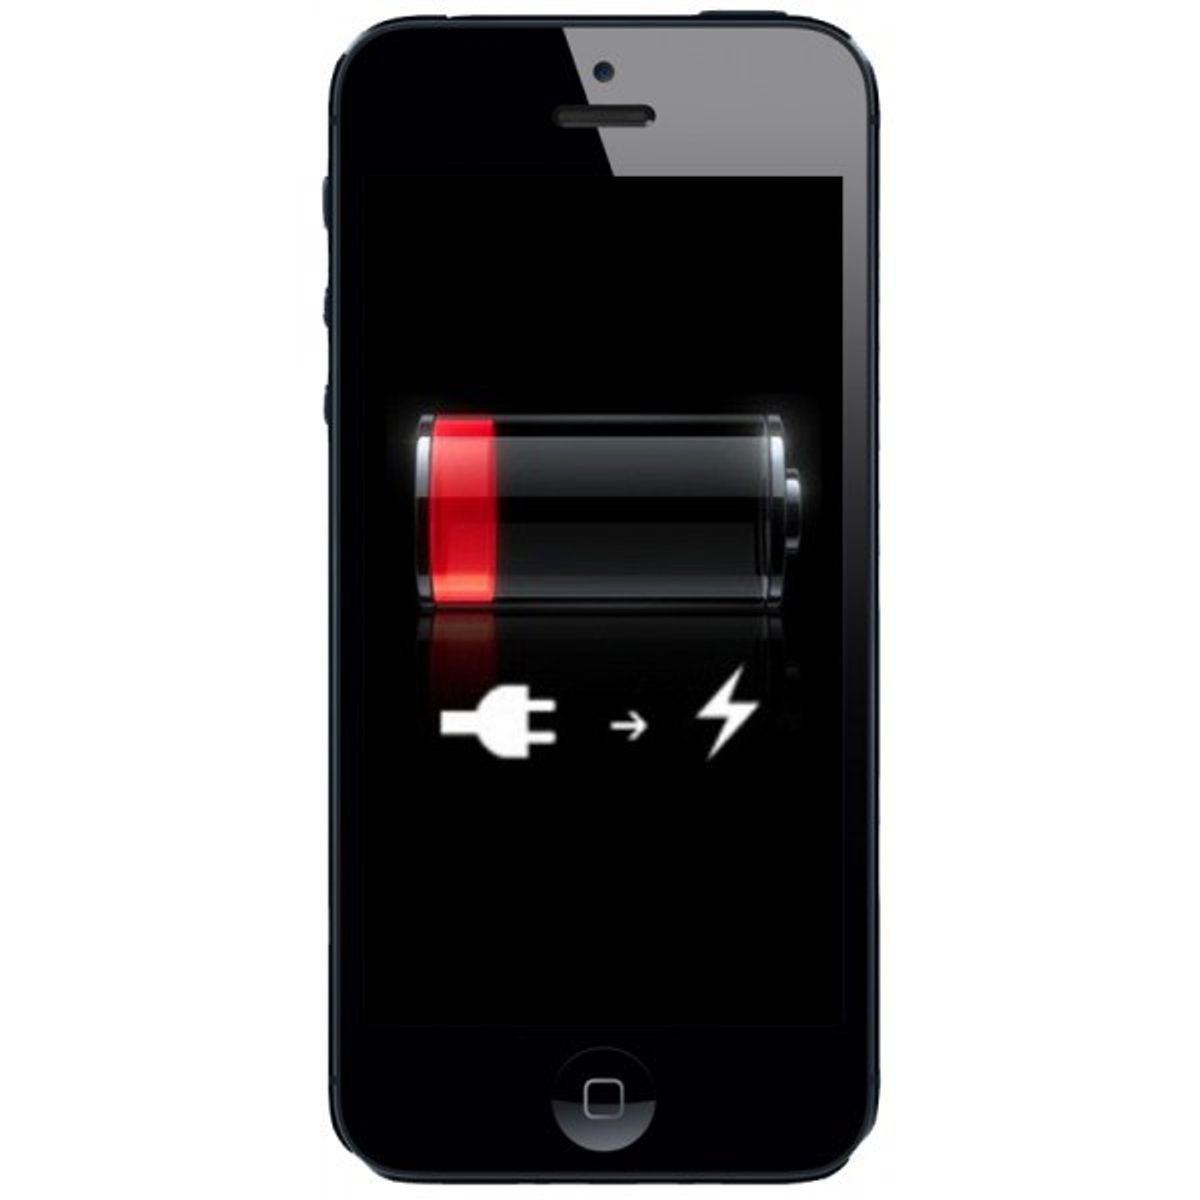 How I Lived My Day With 20 Percent Battery